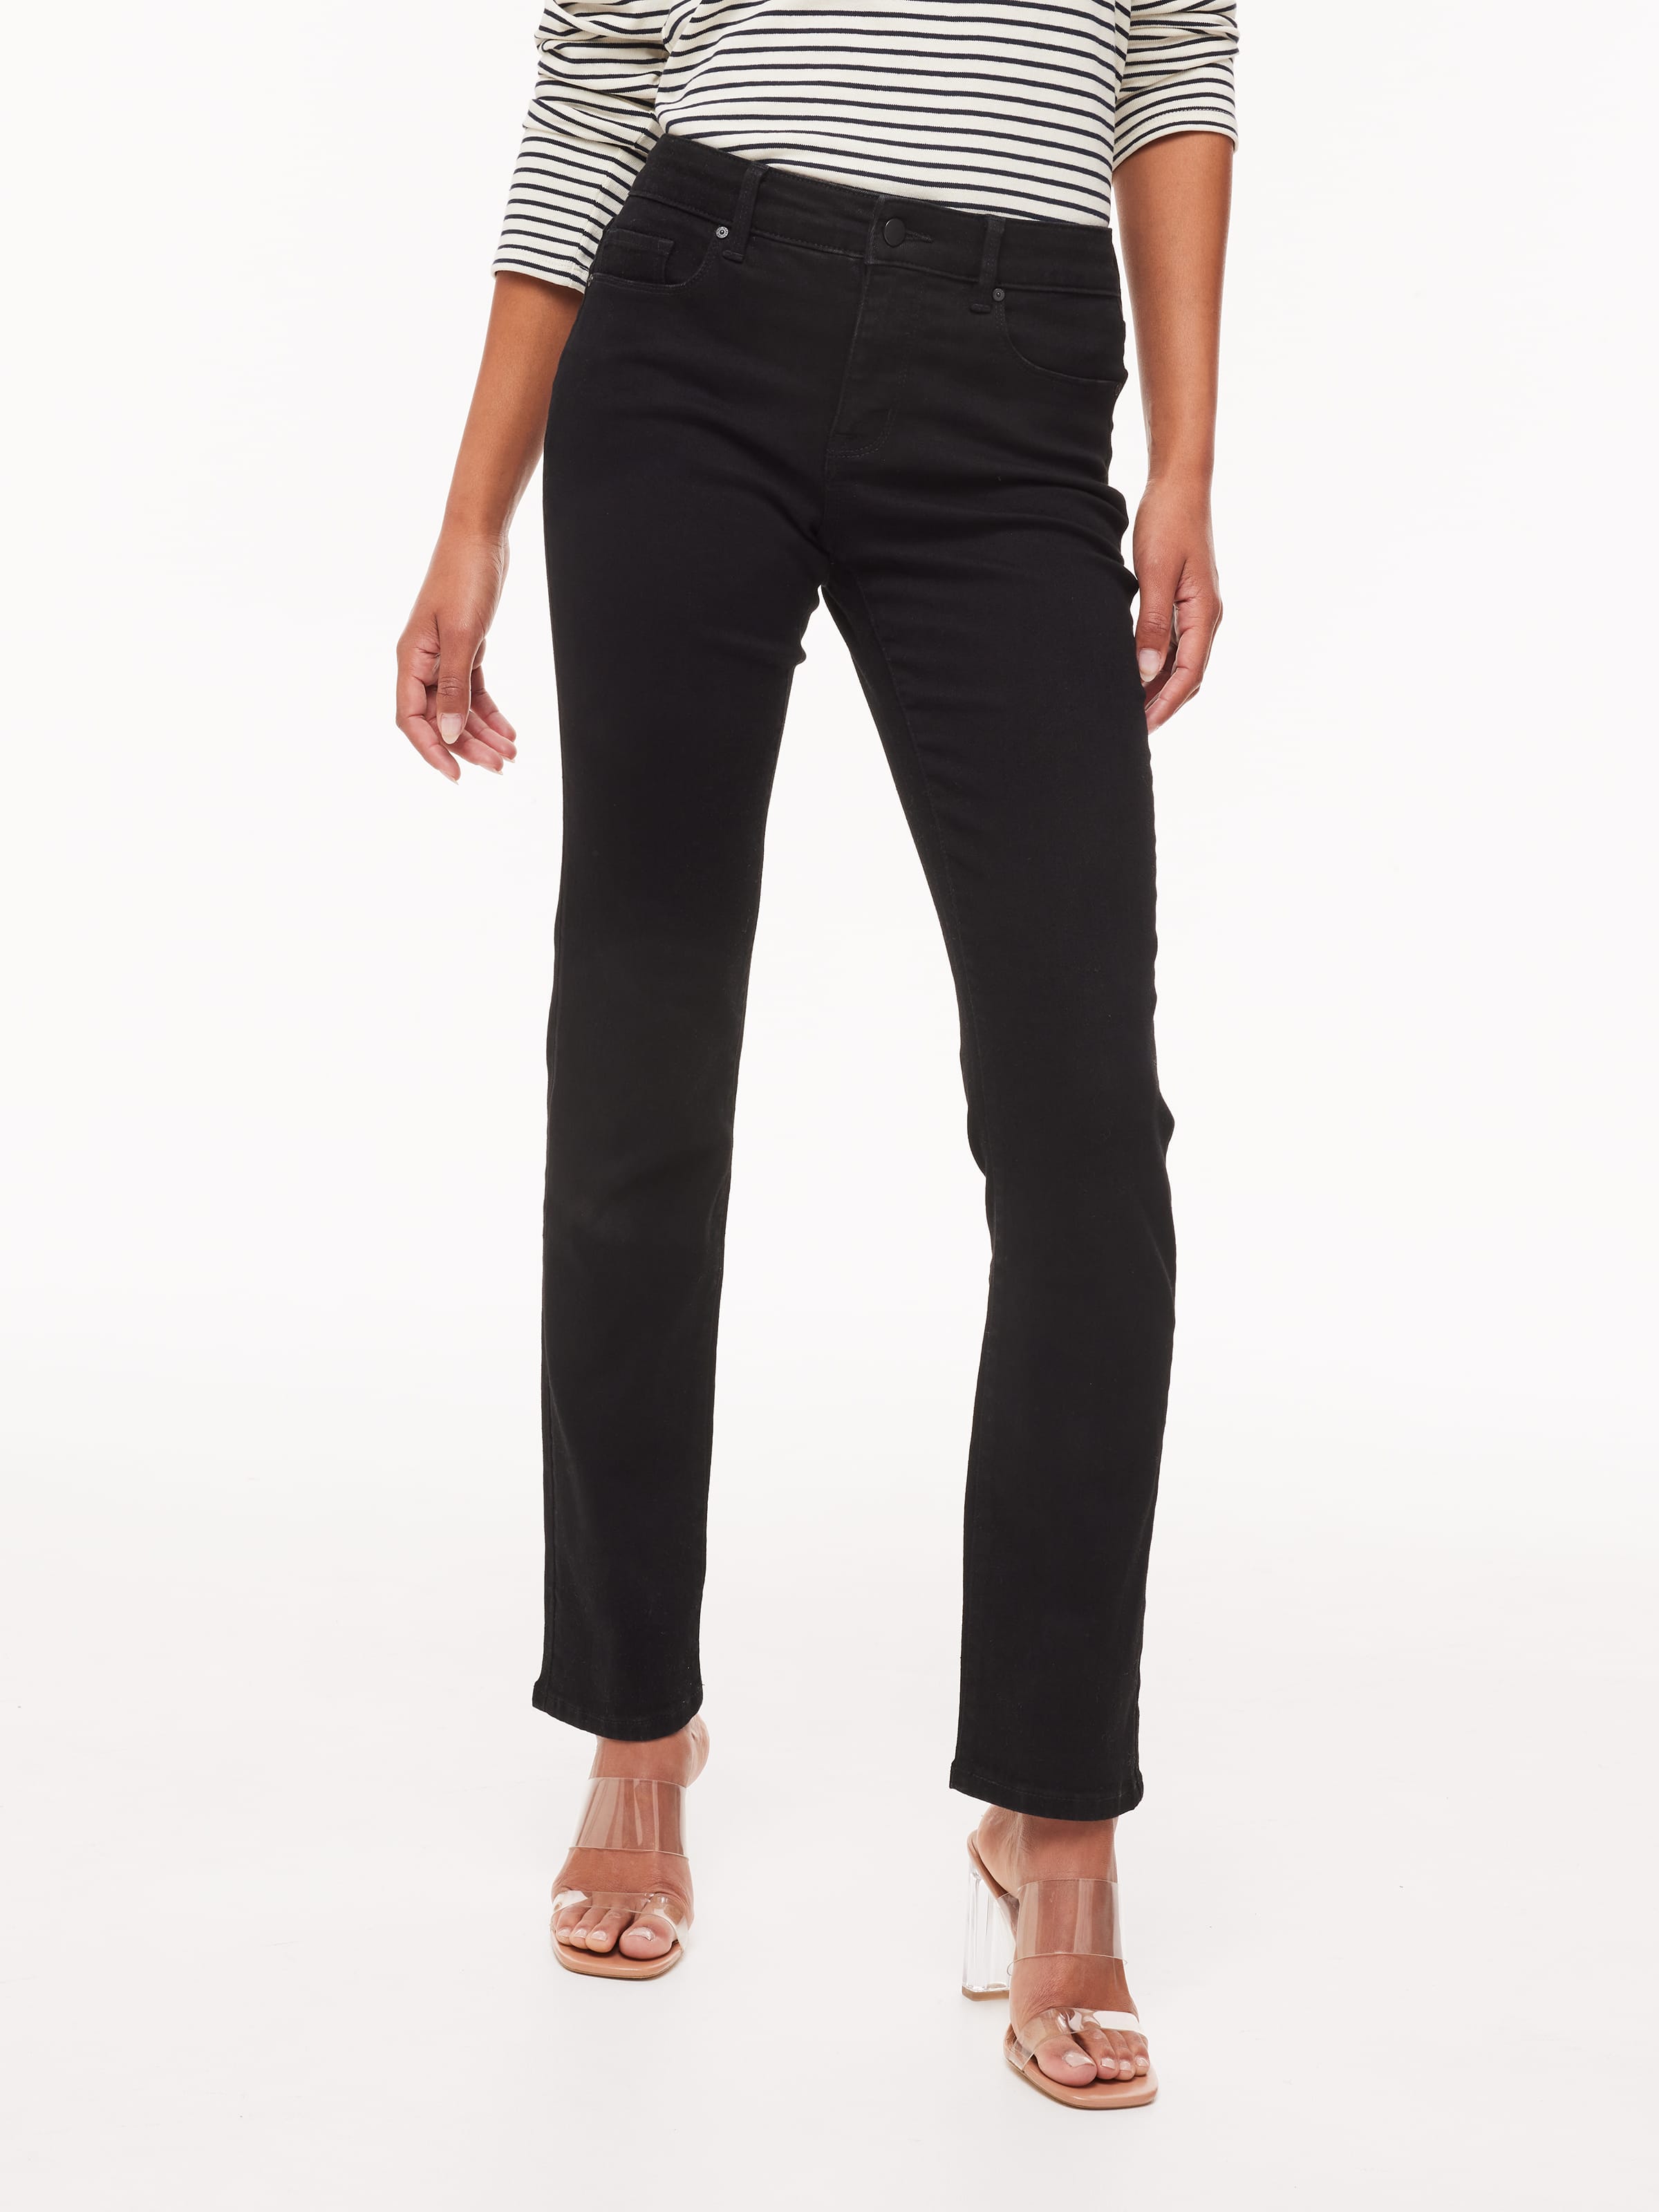 Reformed High Rise Straight Jean - Just Jeans Online